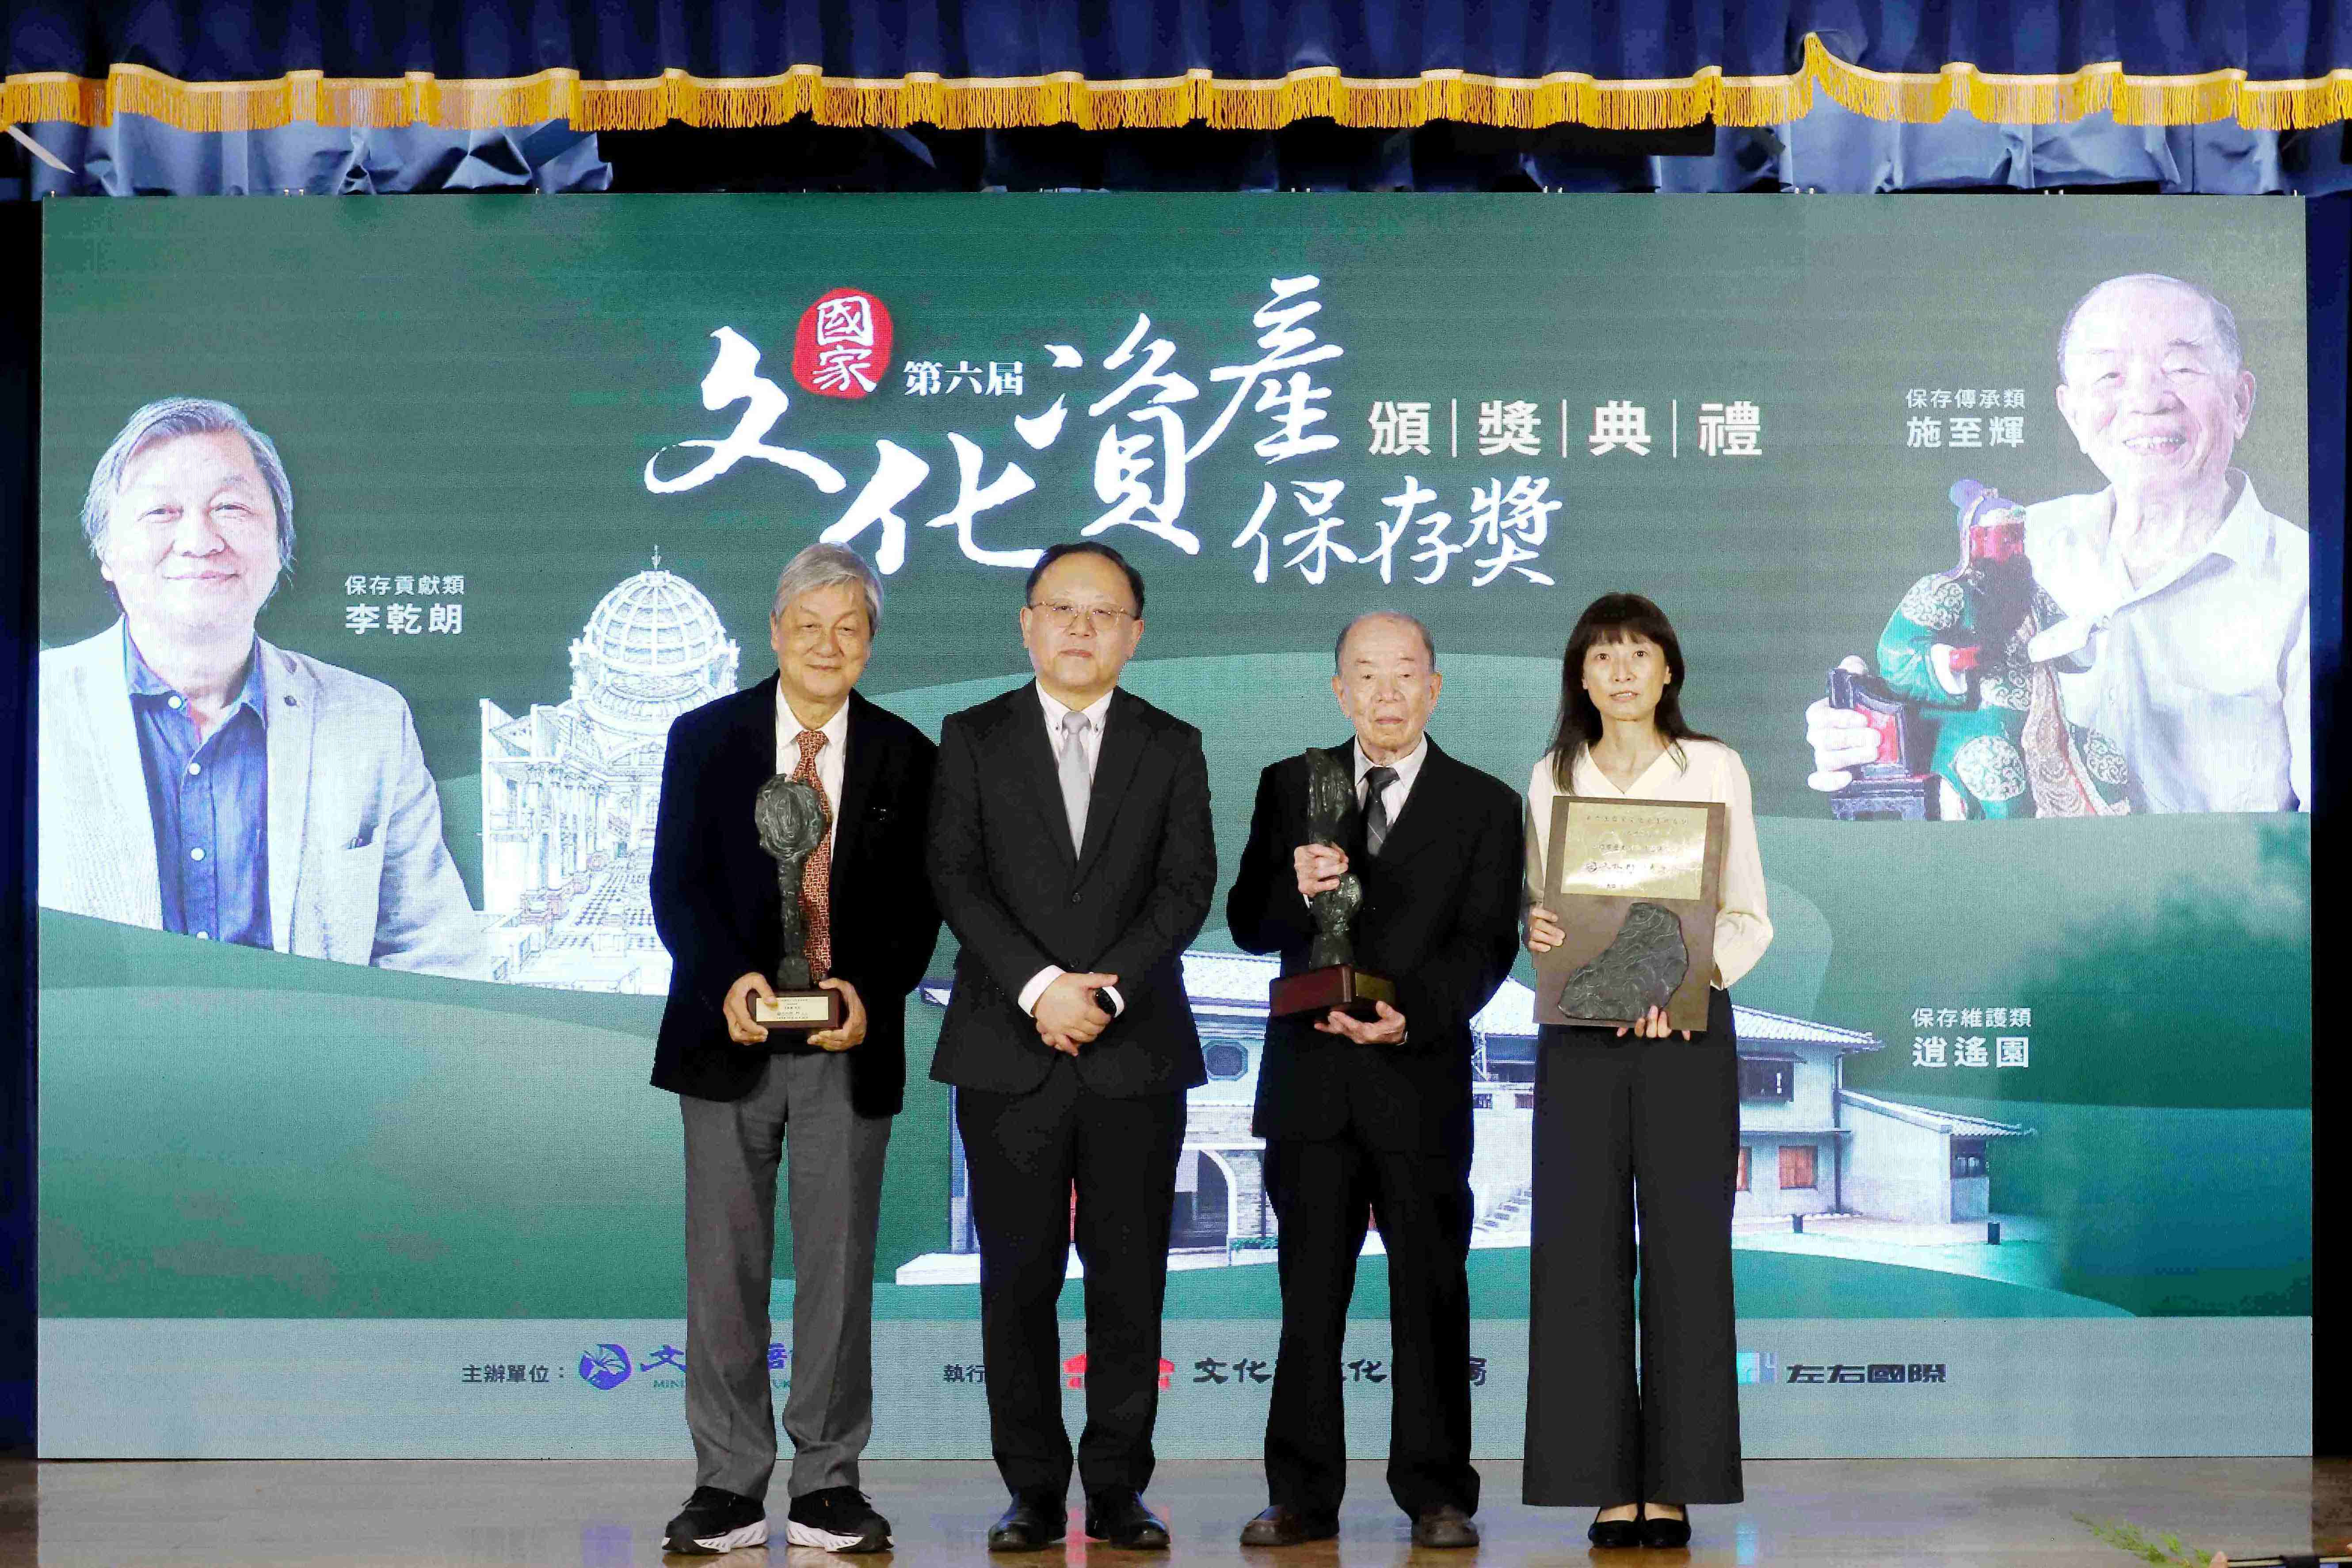 Minister of Culture Shih Che (second from left) presented awards to Li Chien-lang (first from left), Shih Chih-hui (second from right) and representative of Kaohsiung City Government Lin Shang-yin (first from right)